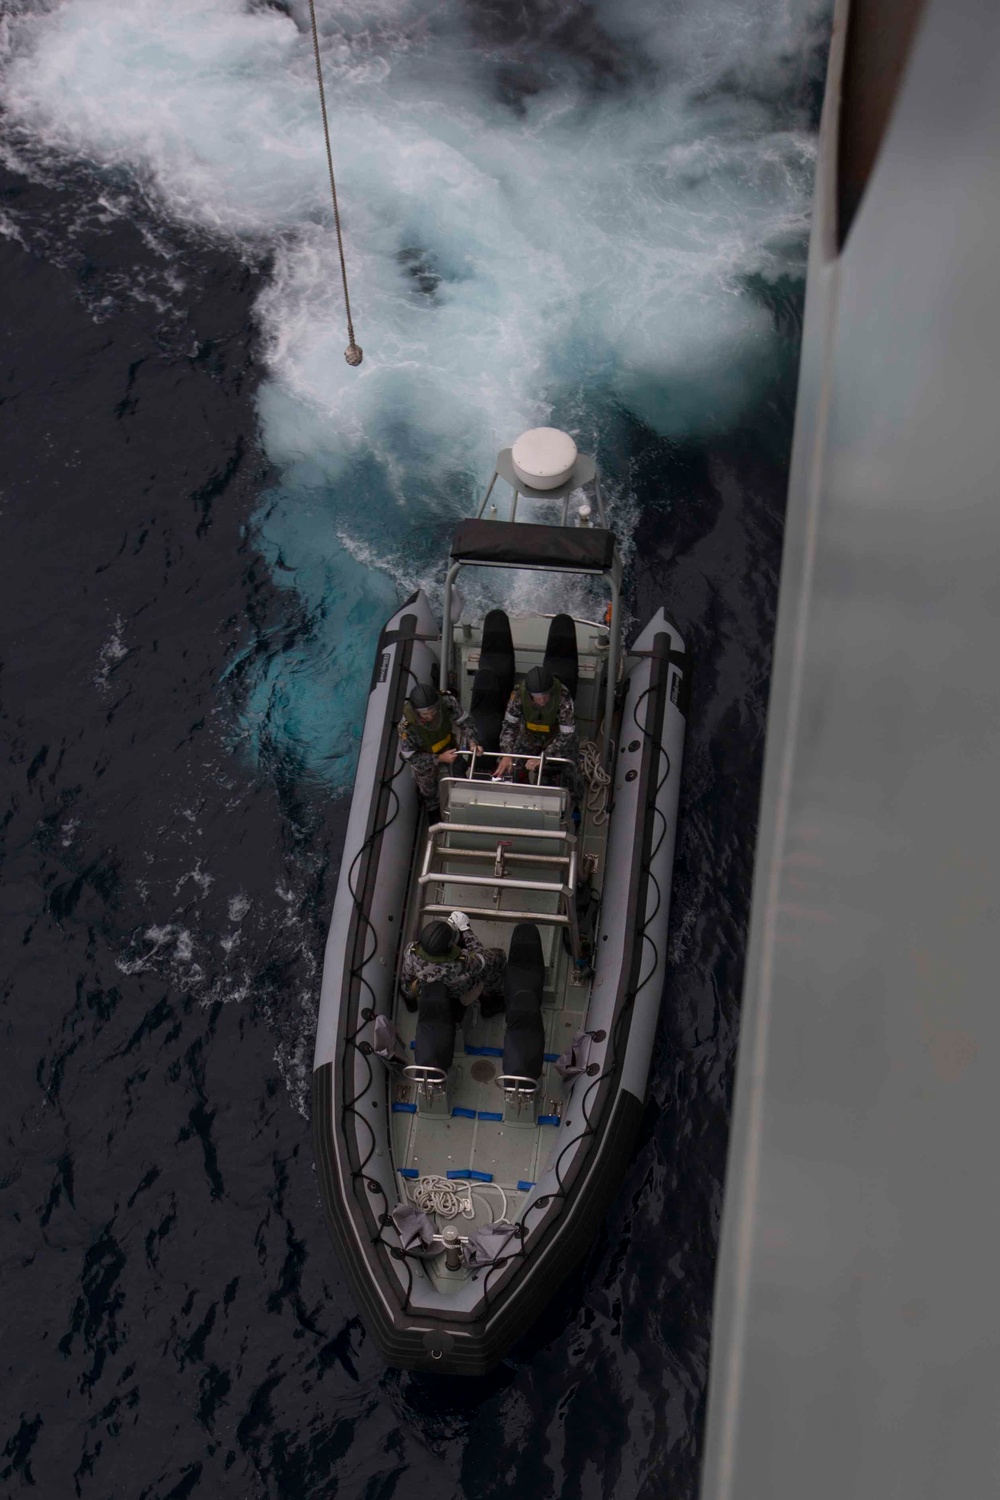 Australian sailors launch a rigged hull inflatable boat off HMAS Adelaide